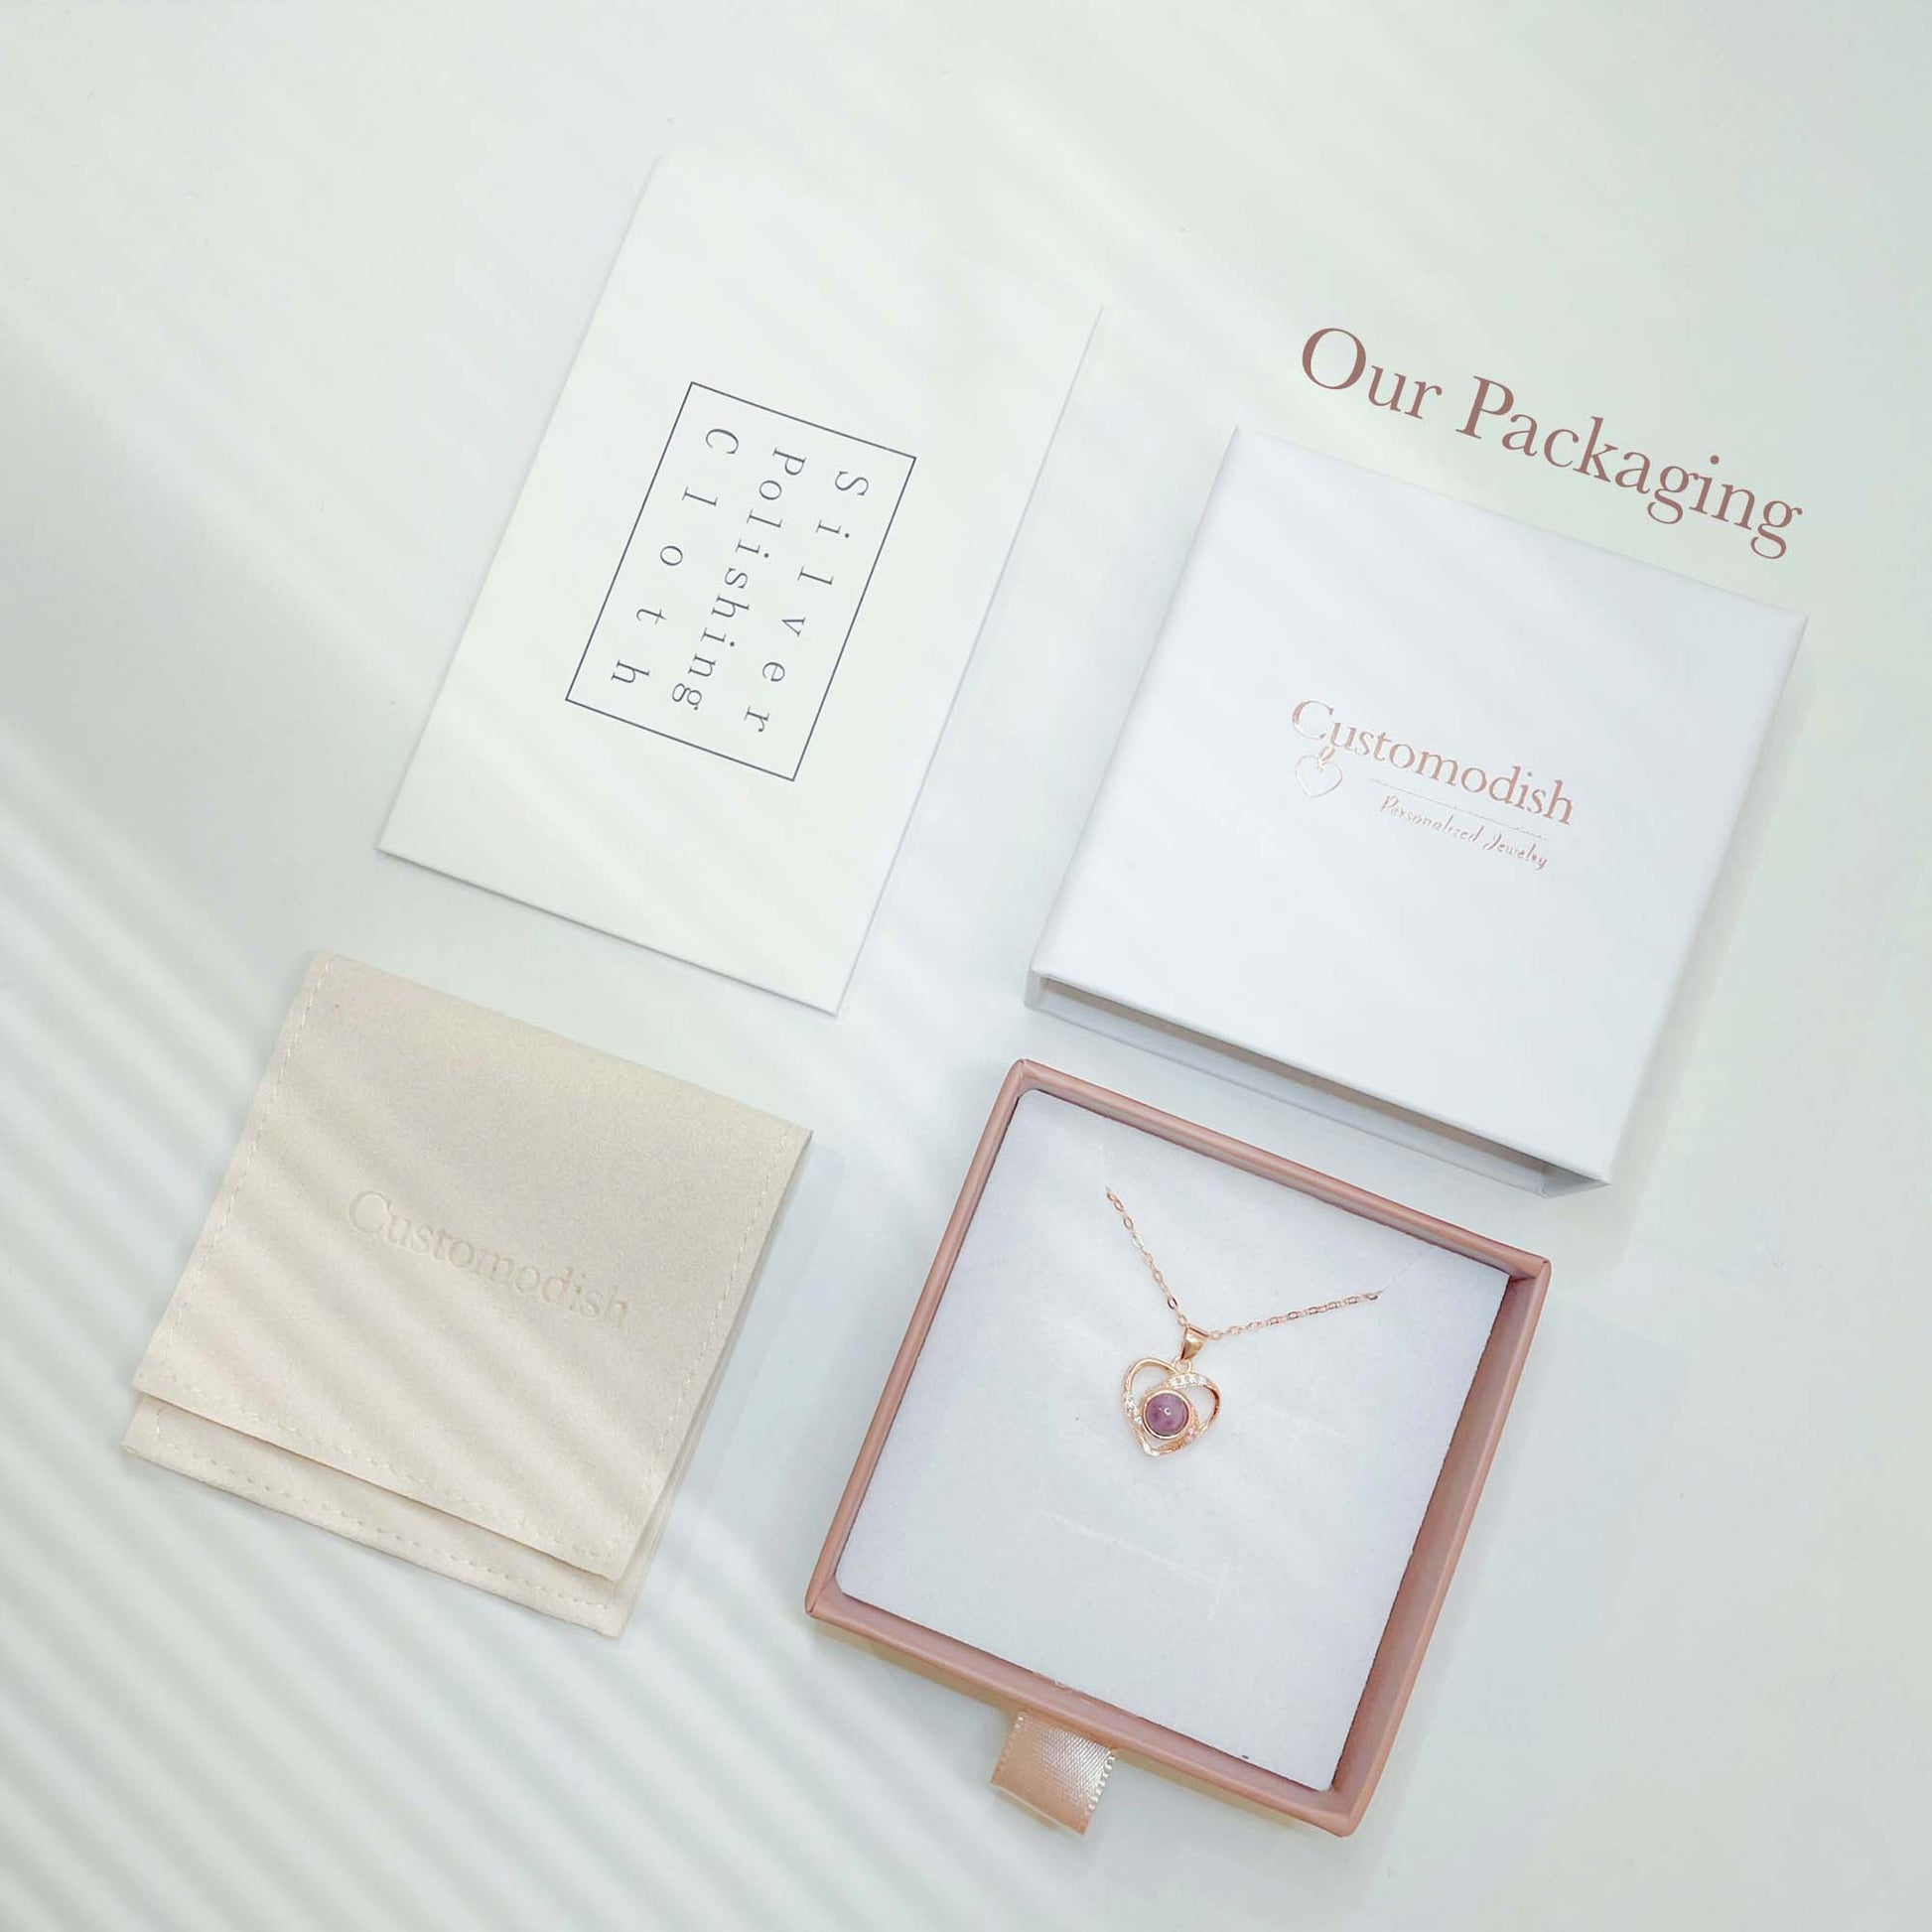 Customodish offers free gift packaging, so our photo projection necklaces will make perfect gifts for everyone on your list!